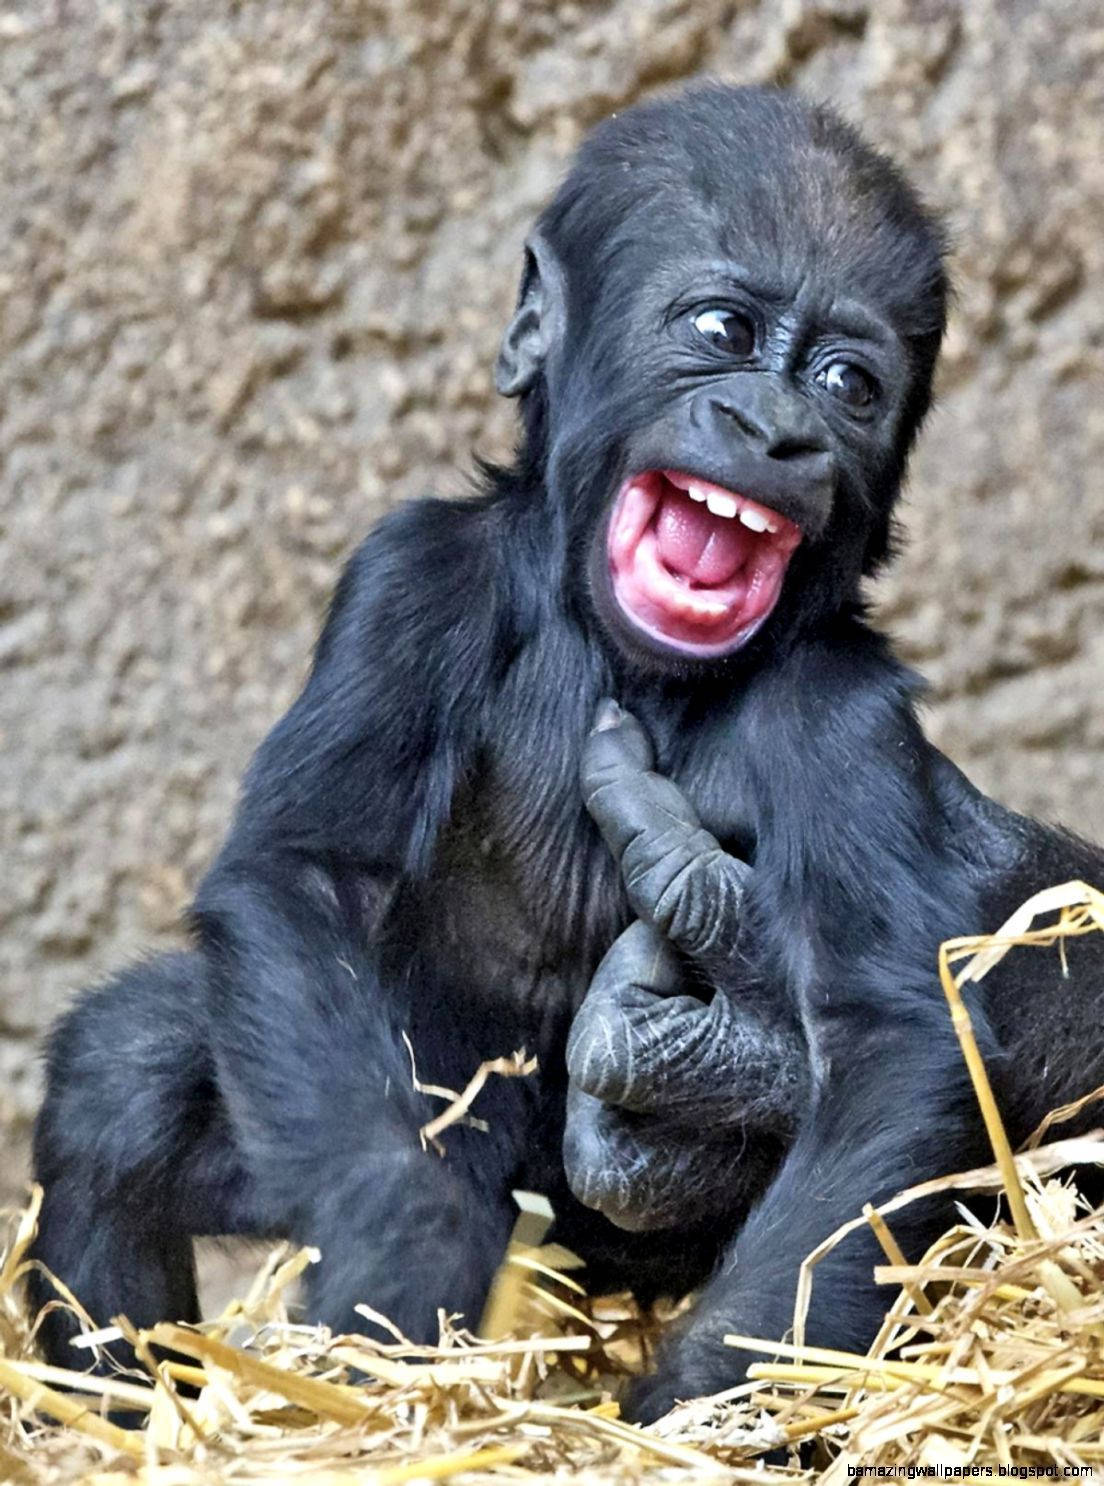 Laughing Baby Gorilla Iphone Background